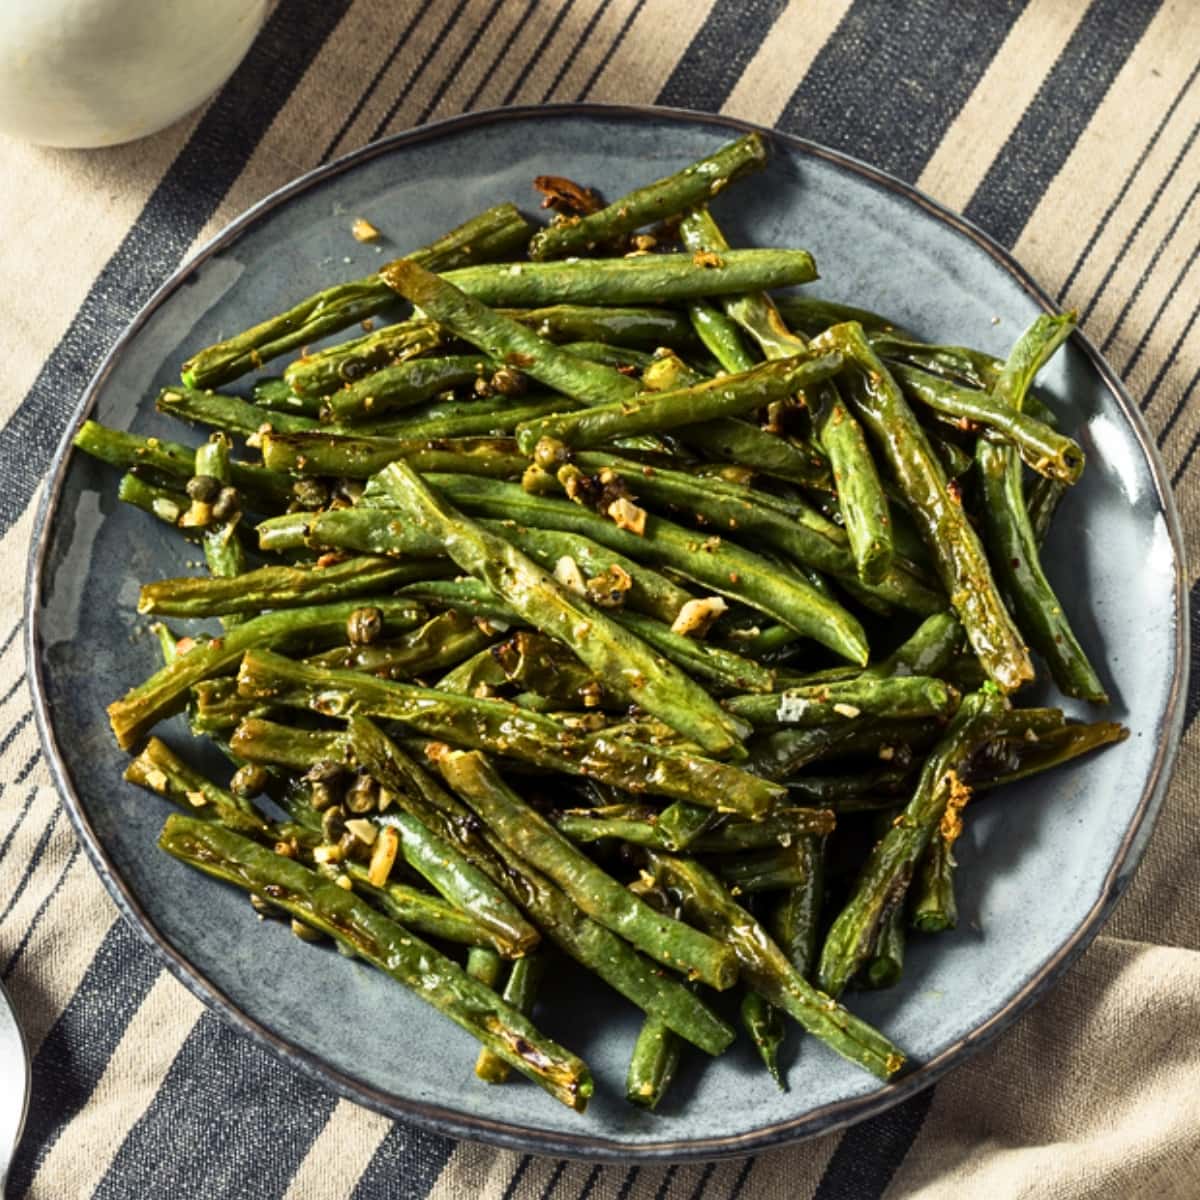 Roasted green beans in a plate.